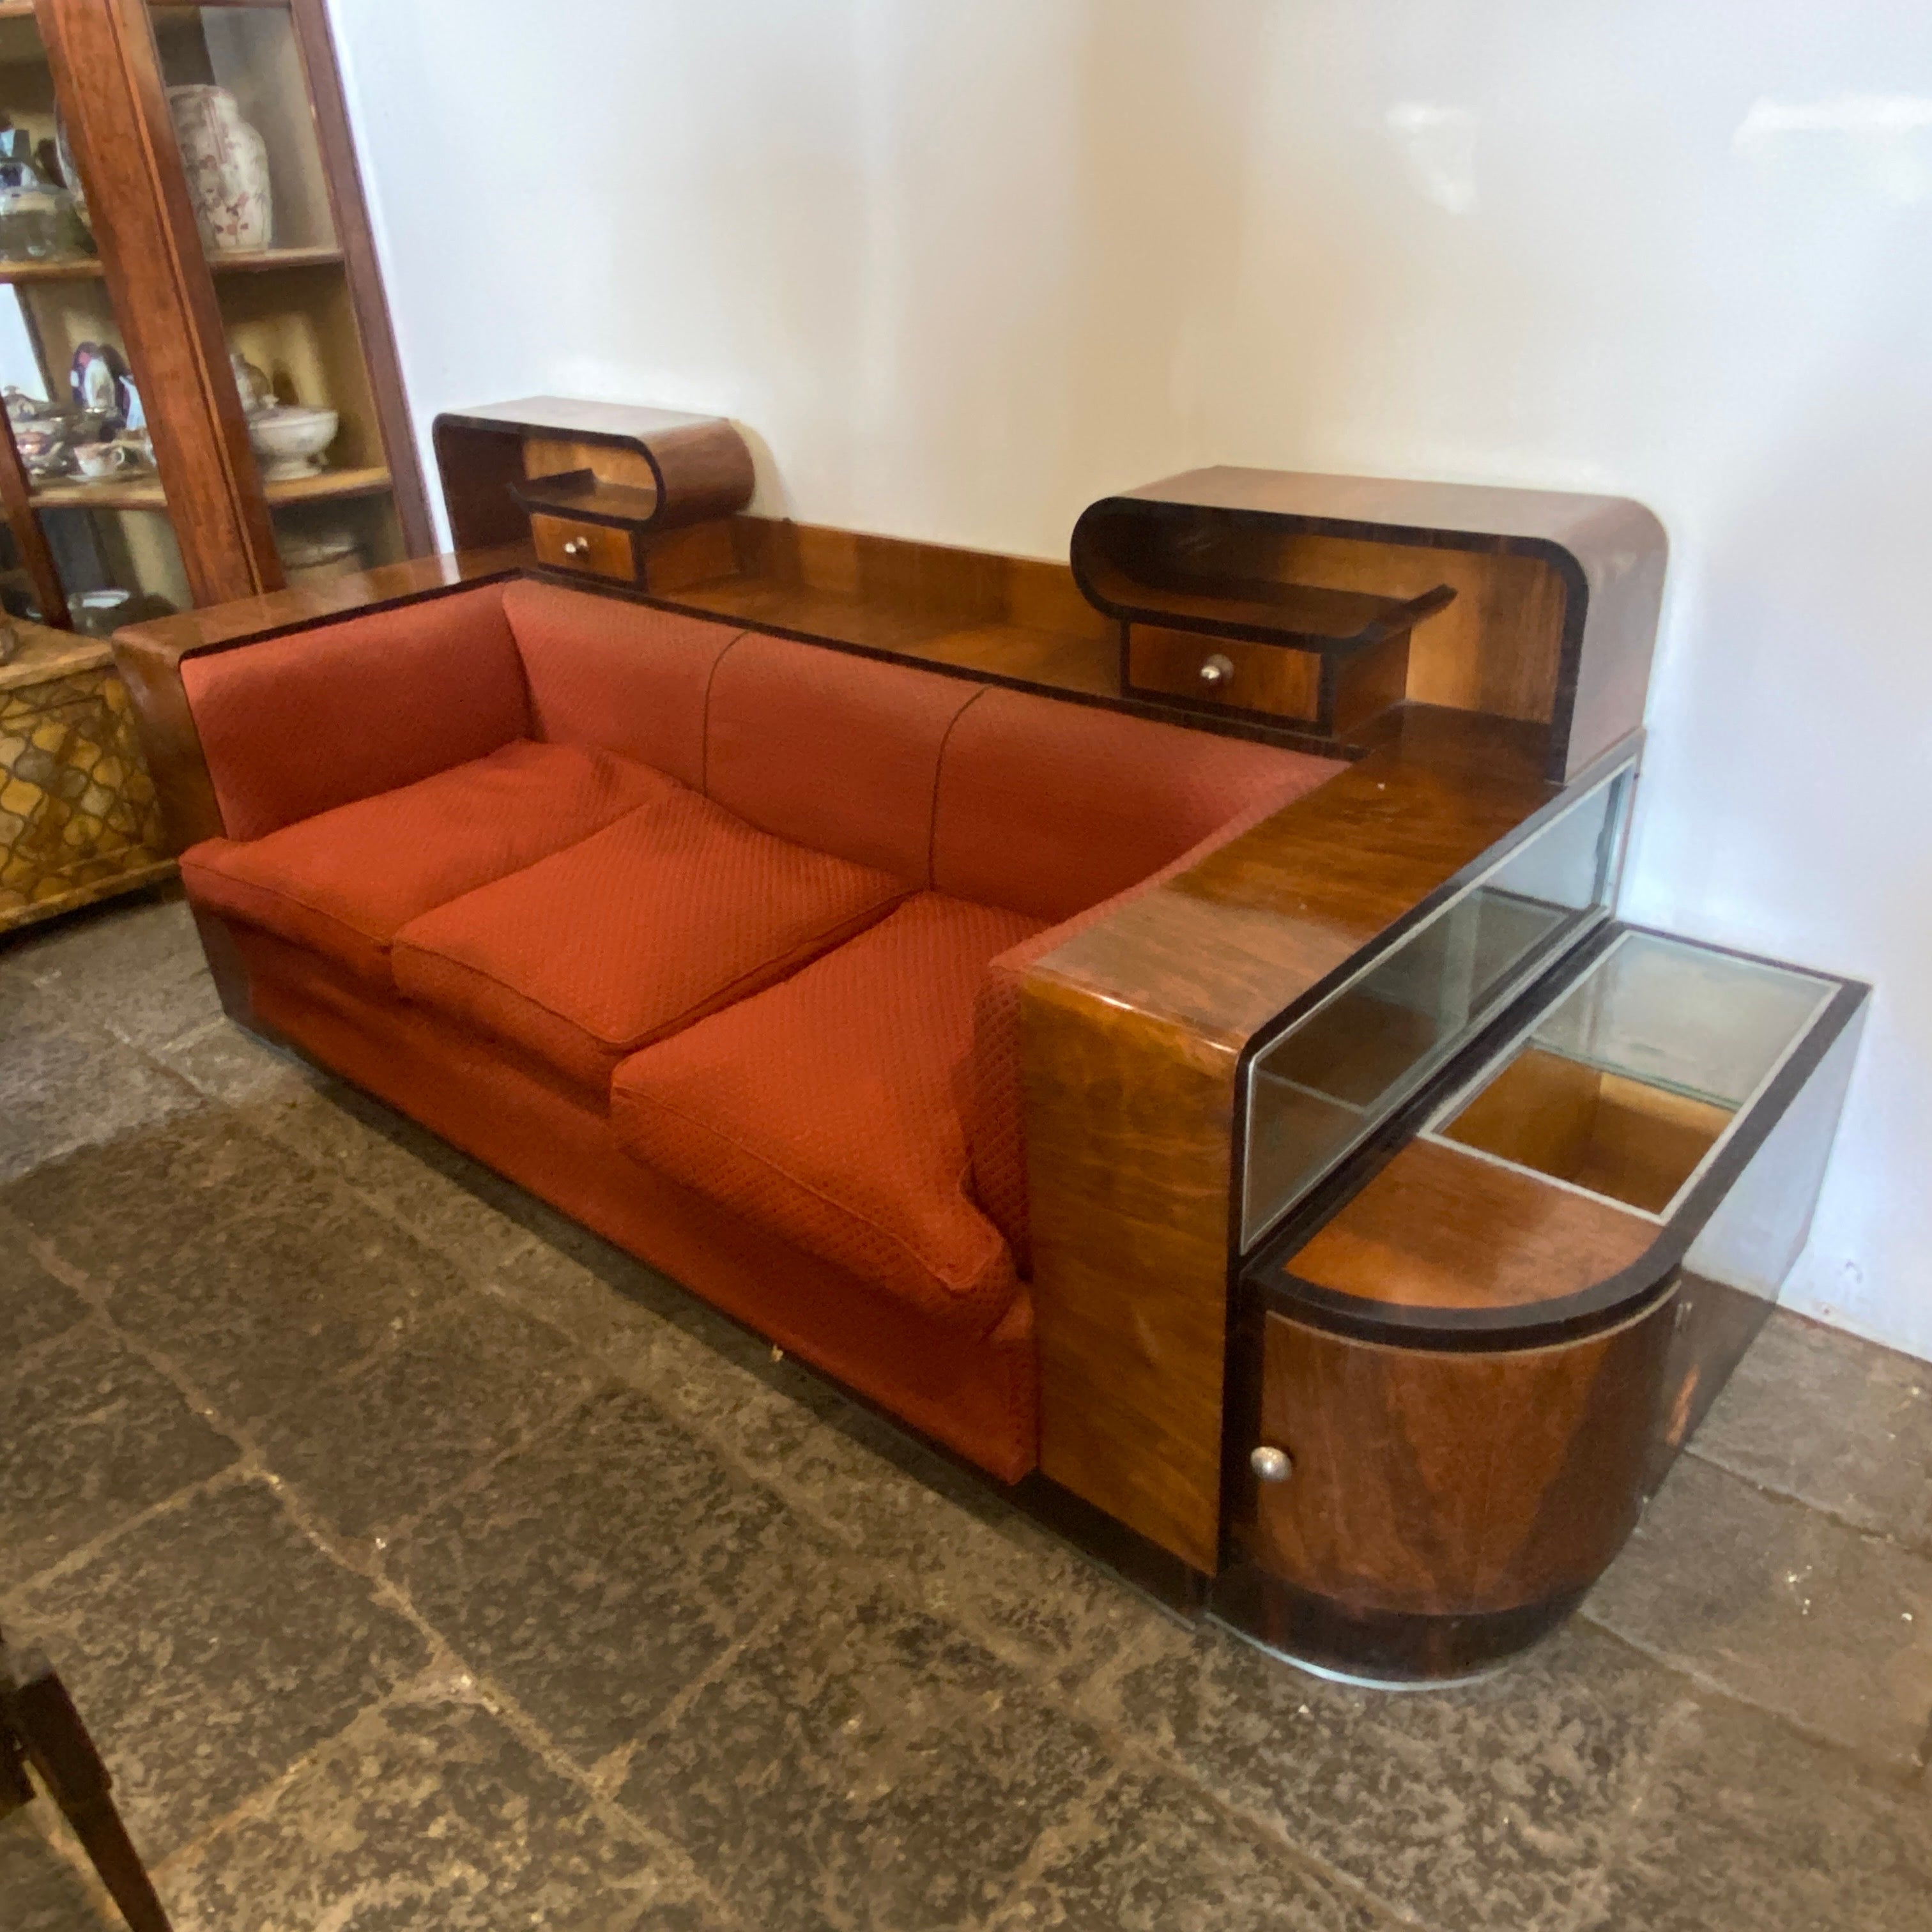 A rare art deco sofa with a bar cabinet in a side manufactured in Italy in the Thirties. It's in lovely original conditions, also the red fabric is original. It's a superb example of Italian art deco furniture.